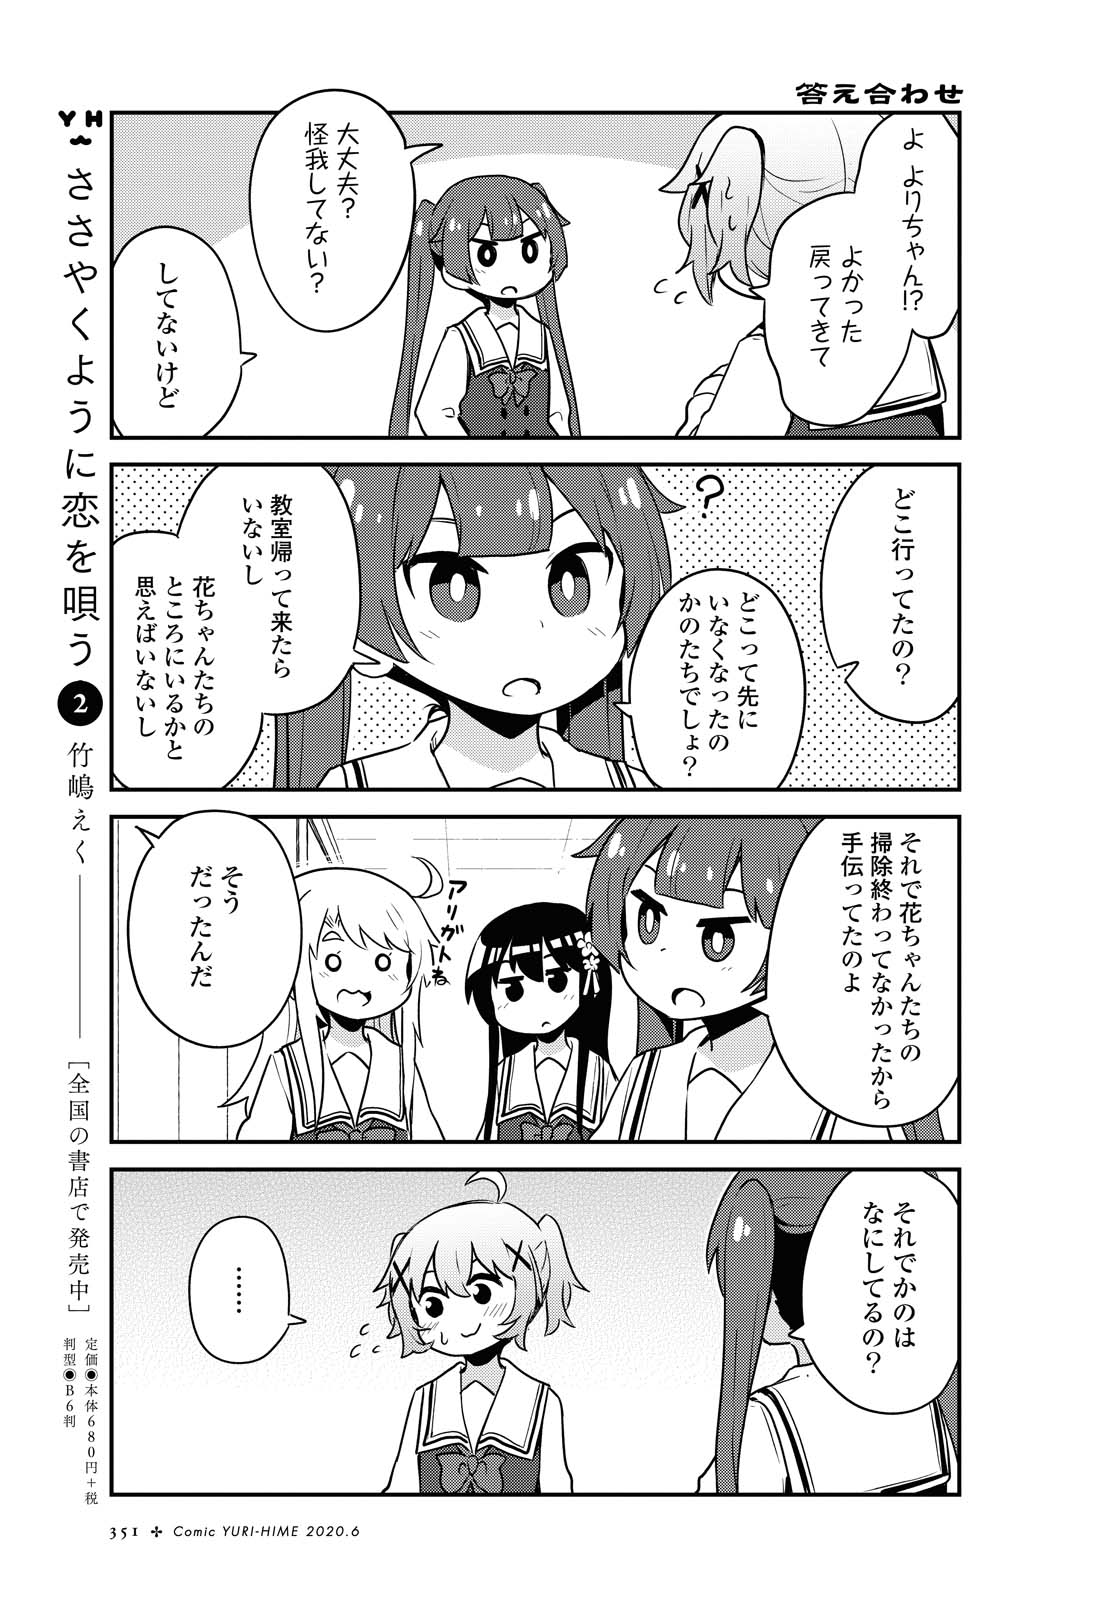 Wataten! An Angel Flew Down to Me 私に天使が舞い降りた！ 第64話 - Page 13